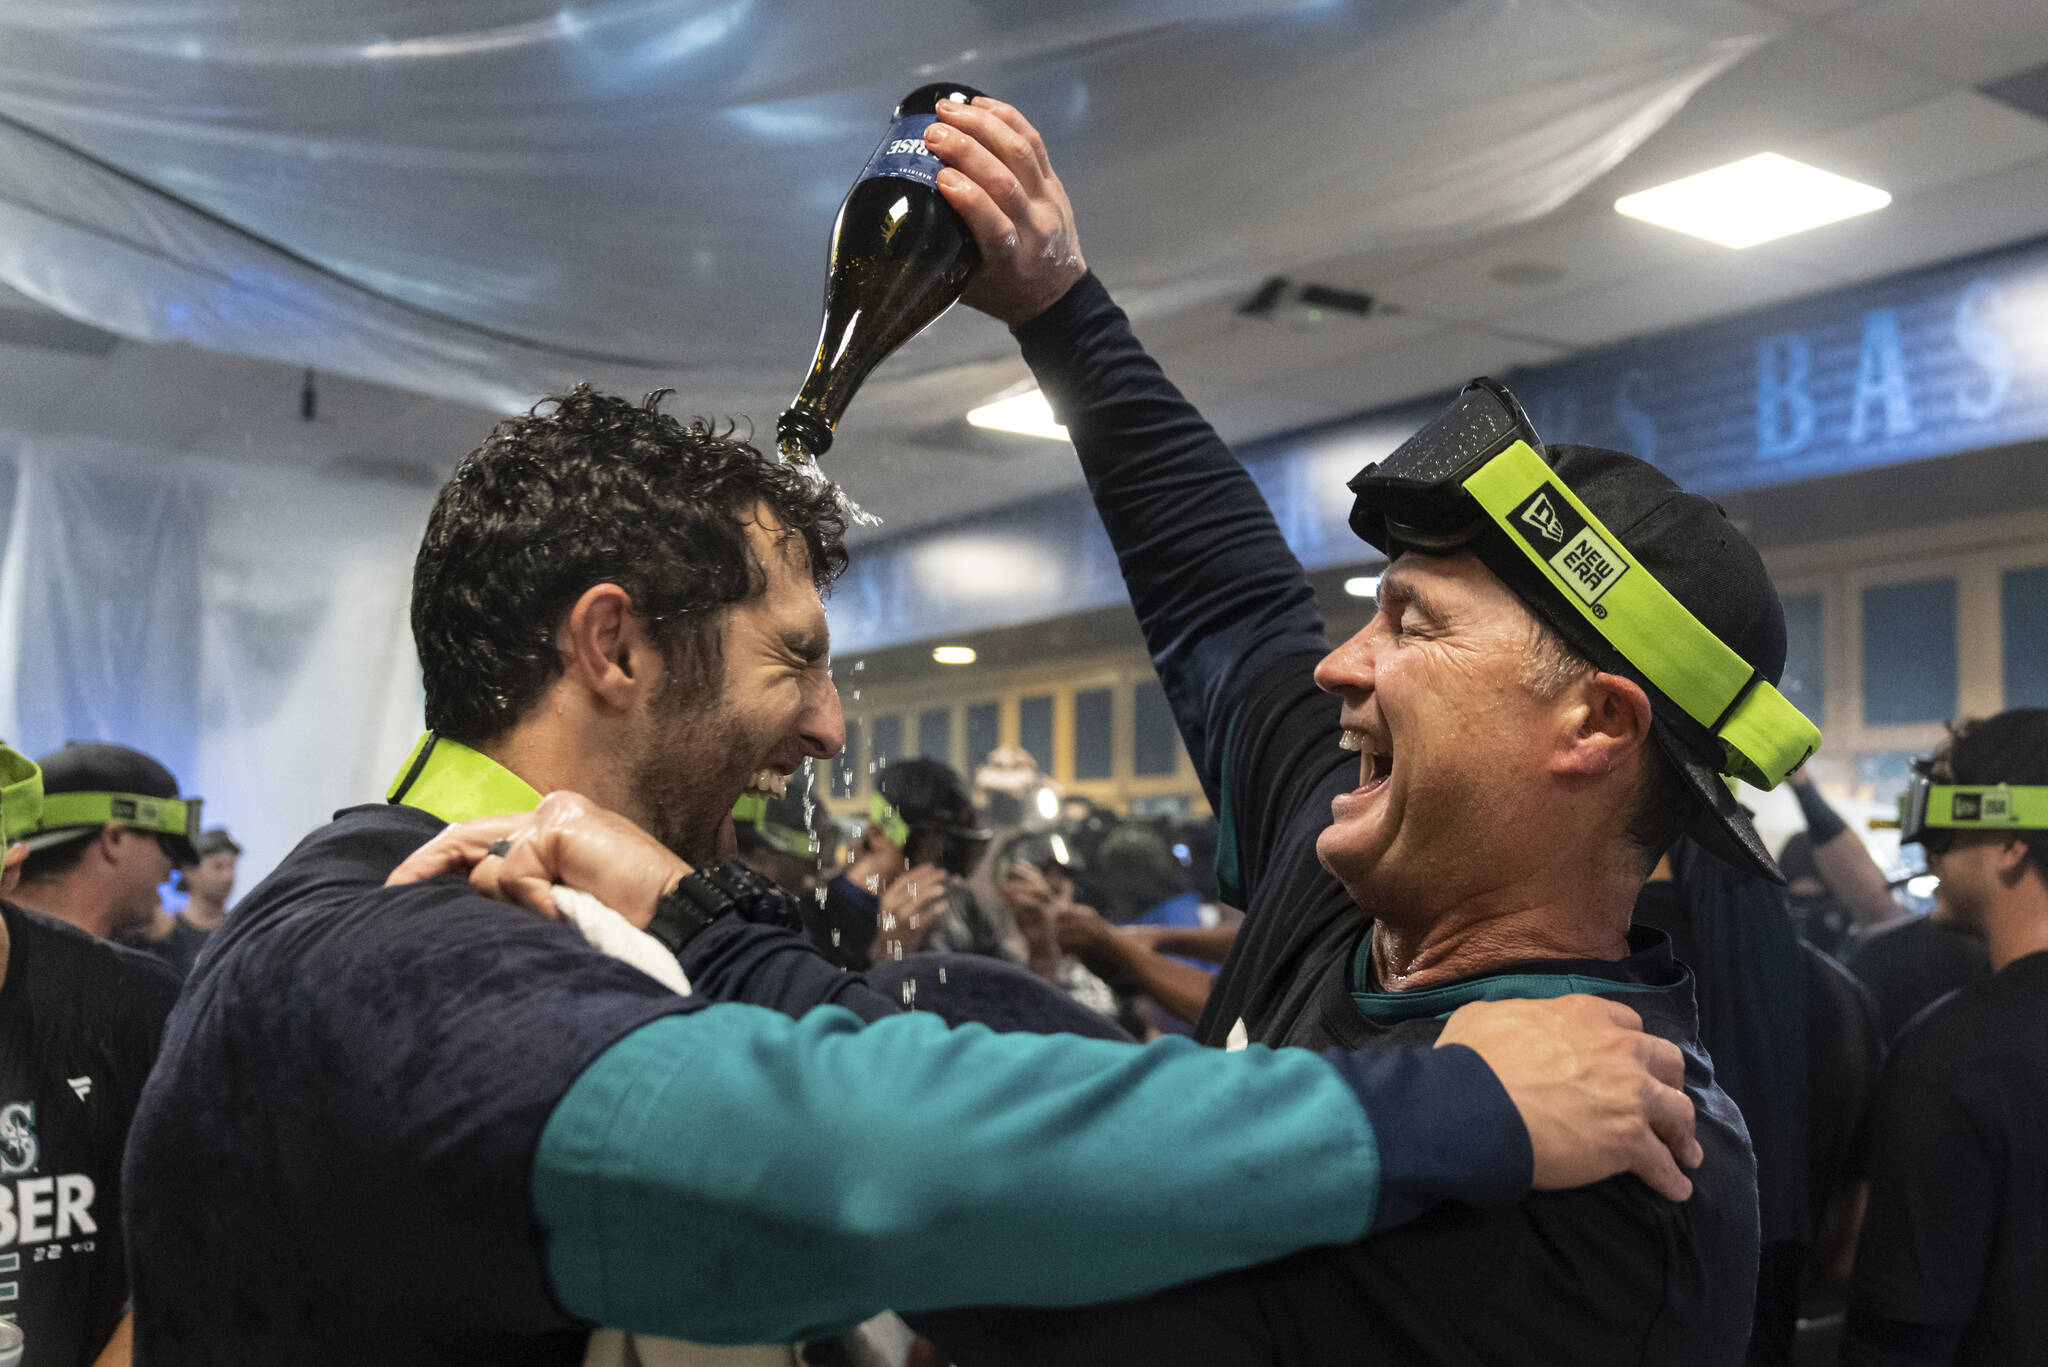 Seattle Mariners manager Scott Servais, right, celebrates in the clubhouse after the team’s baseball game against the Oakland Athletics, Friday, Sept. 30, 2022, in Seattle. The Mariners won 2-1 to clinch a spot in the playoffs. (AP Photo/Stephen Brashear)